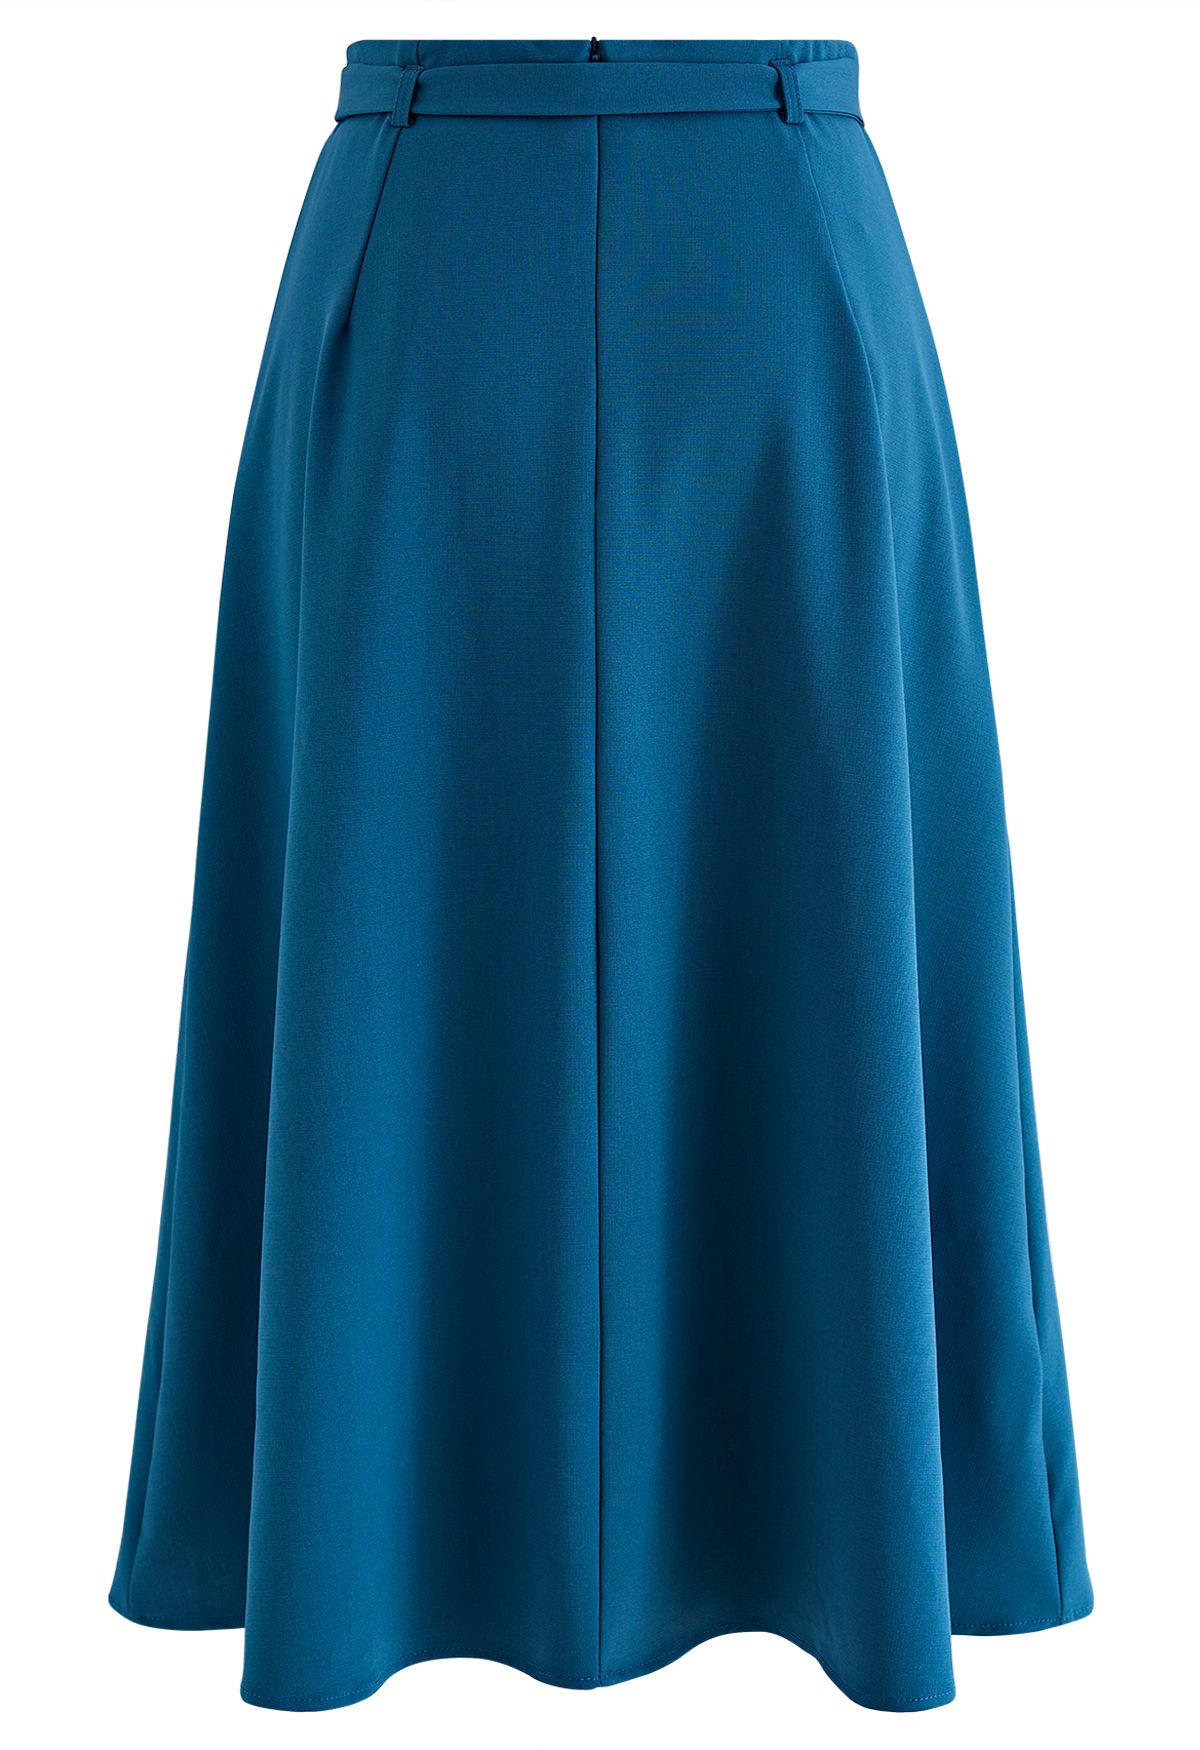 Belted Pleated A-Line Midi Skirt in Teal